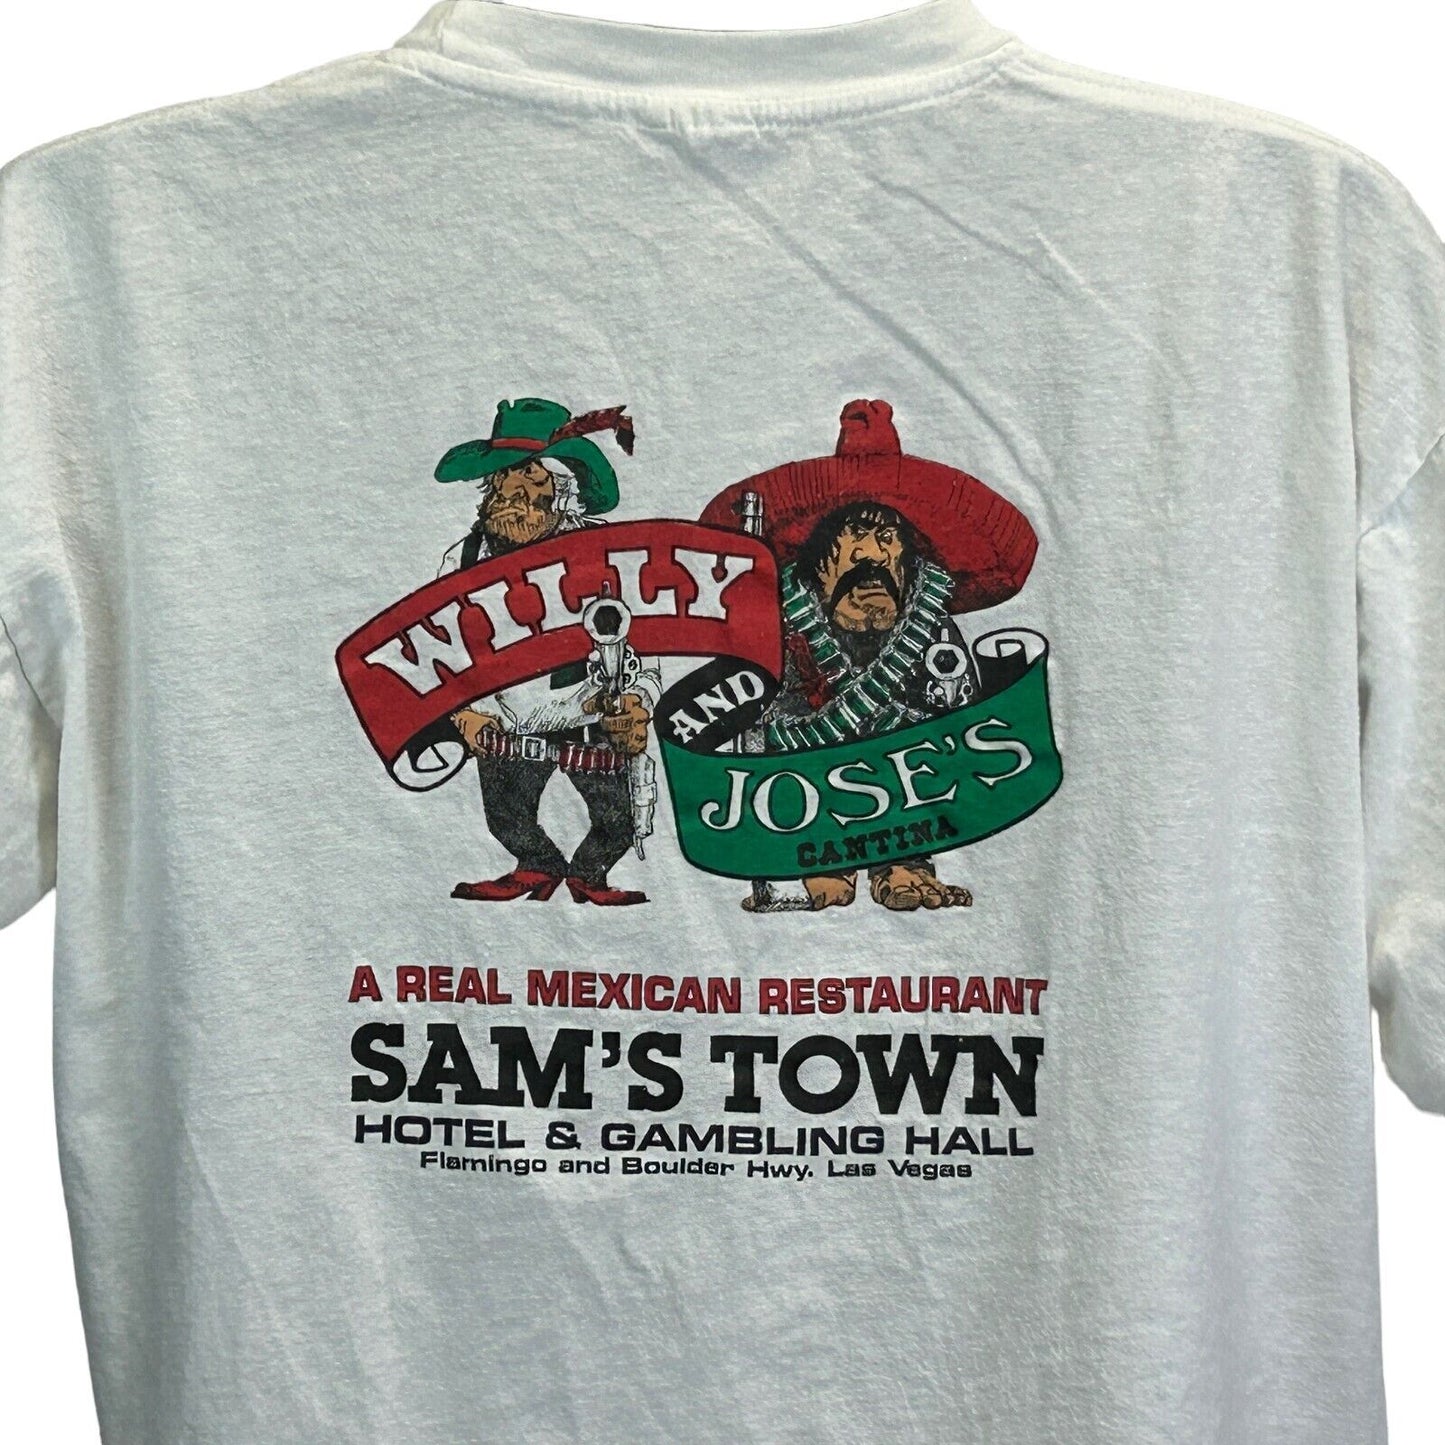 Sam's Town Willy And Jose's Cantina Vintage 90s T Shirt Las Vegas Casino Tee XL